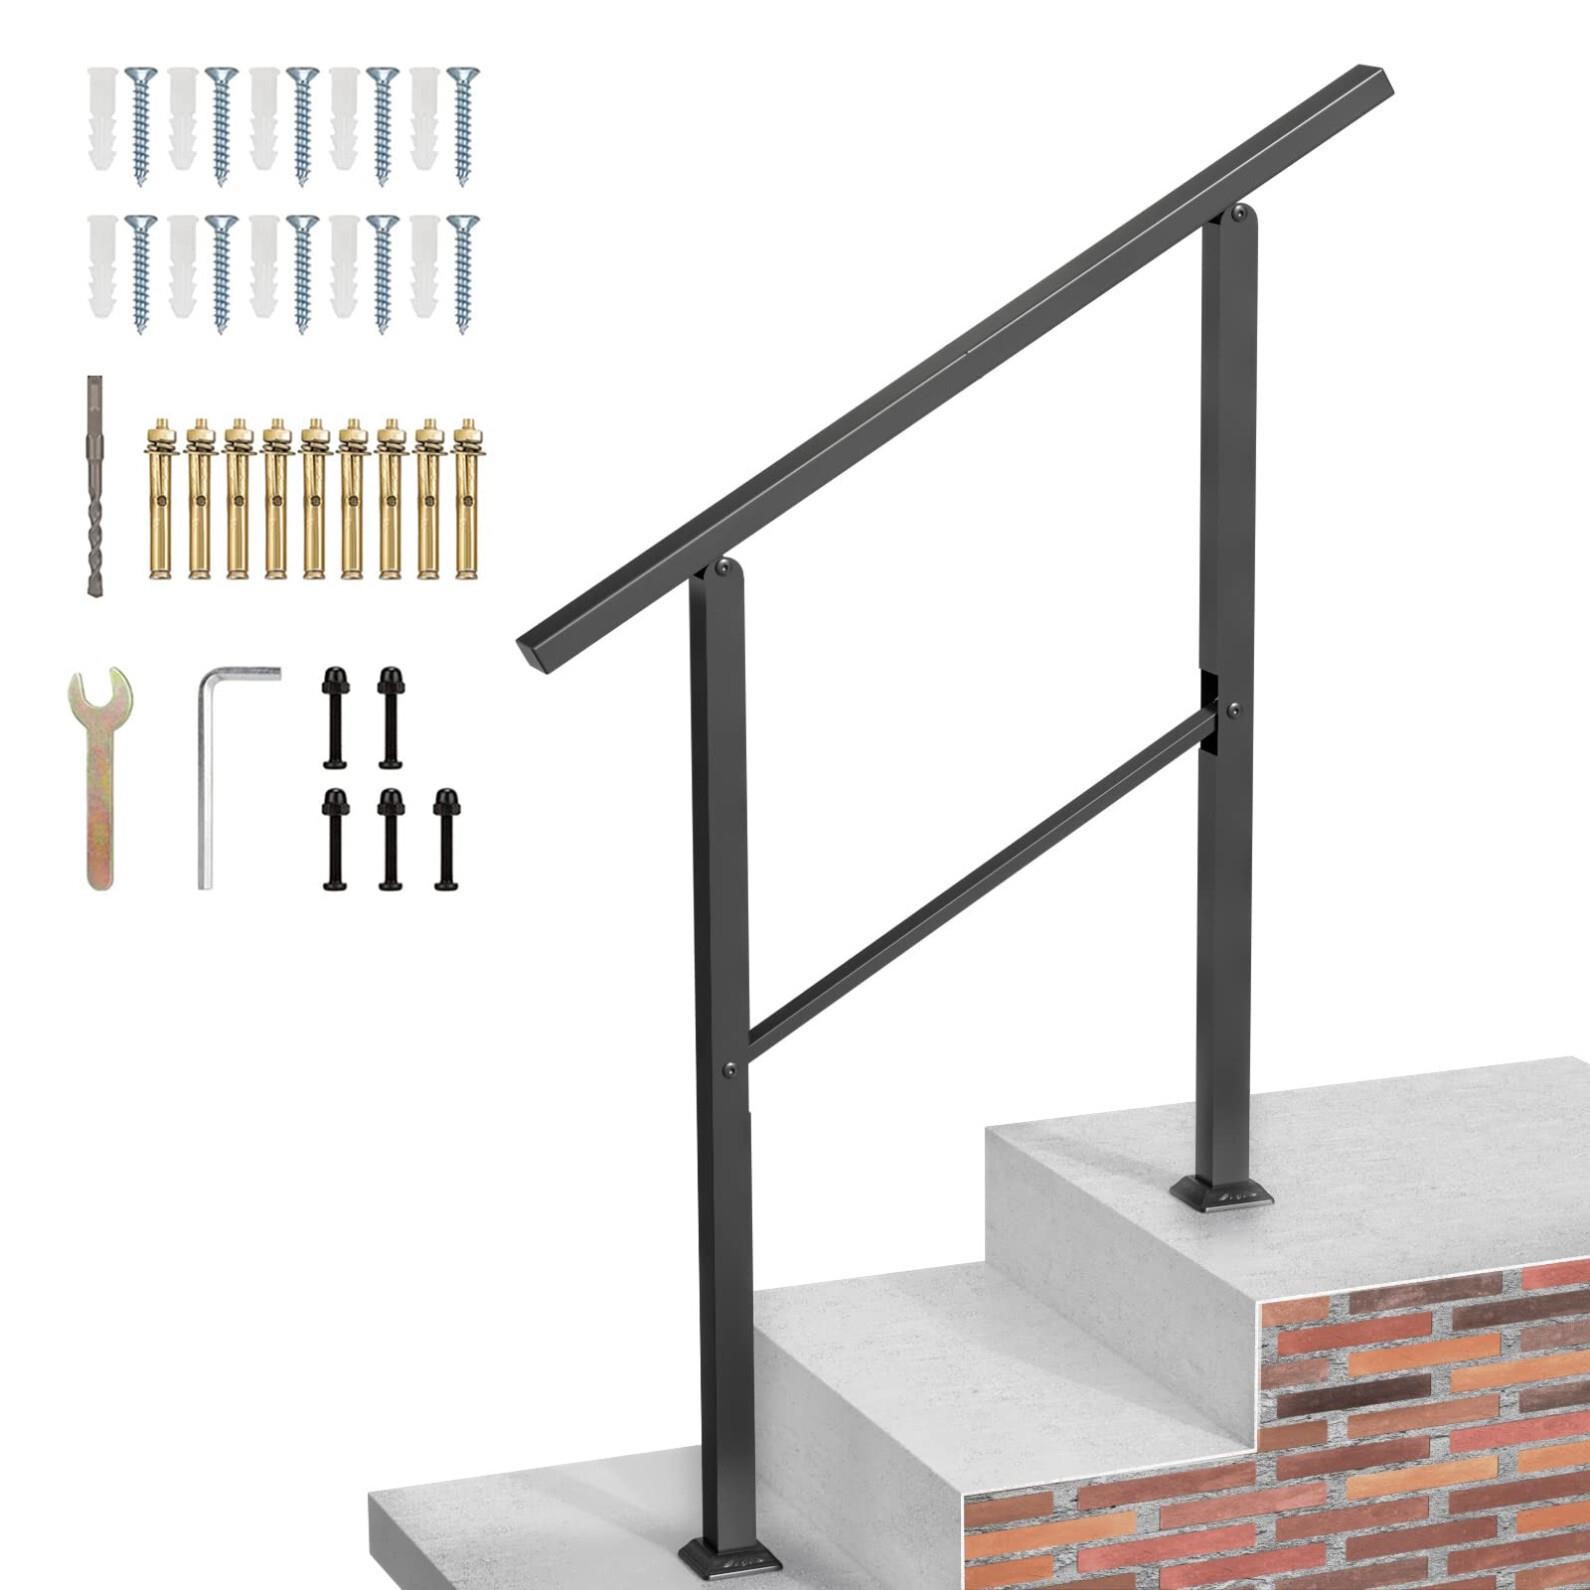 Mychoiii 3-Step Handrails for Outdoor Steps,Outdoo